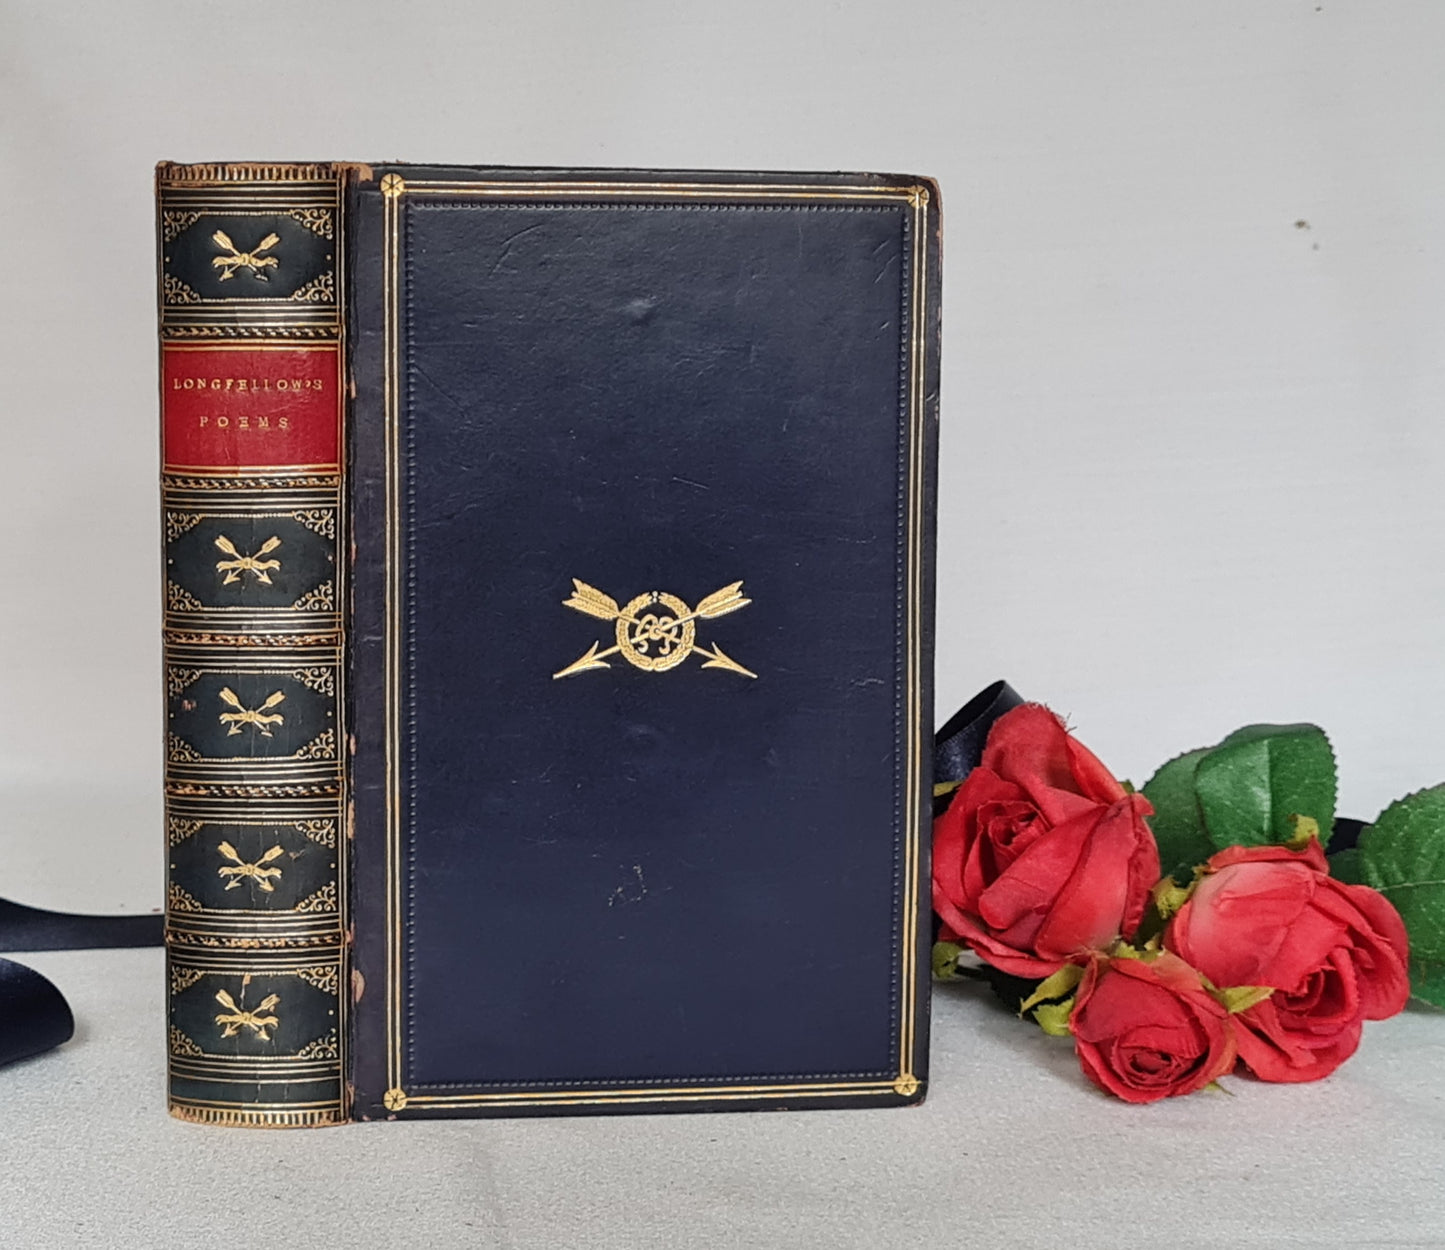 1885 Poems by Henry W Longfellow / David Bogue, London / Beautiful Full Blue Leather Binding / Marbled Sides and Endpapers / Illustrated